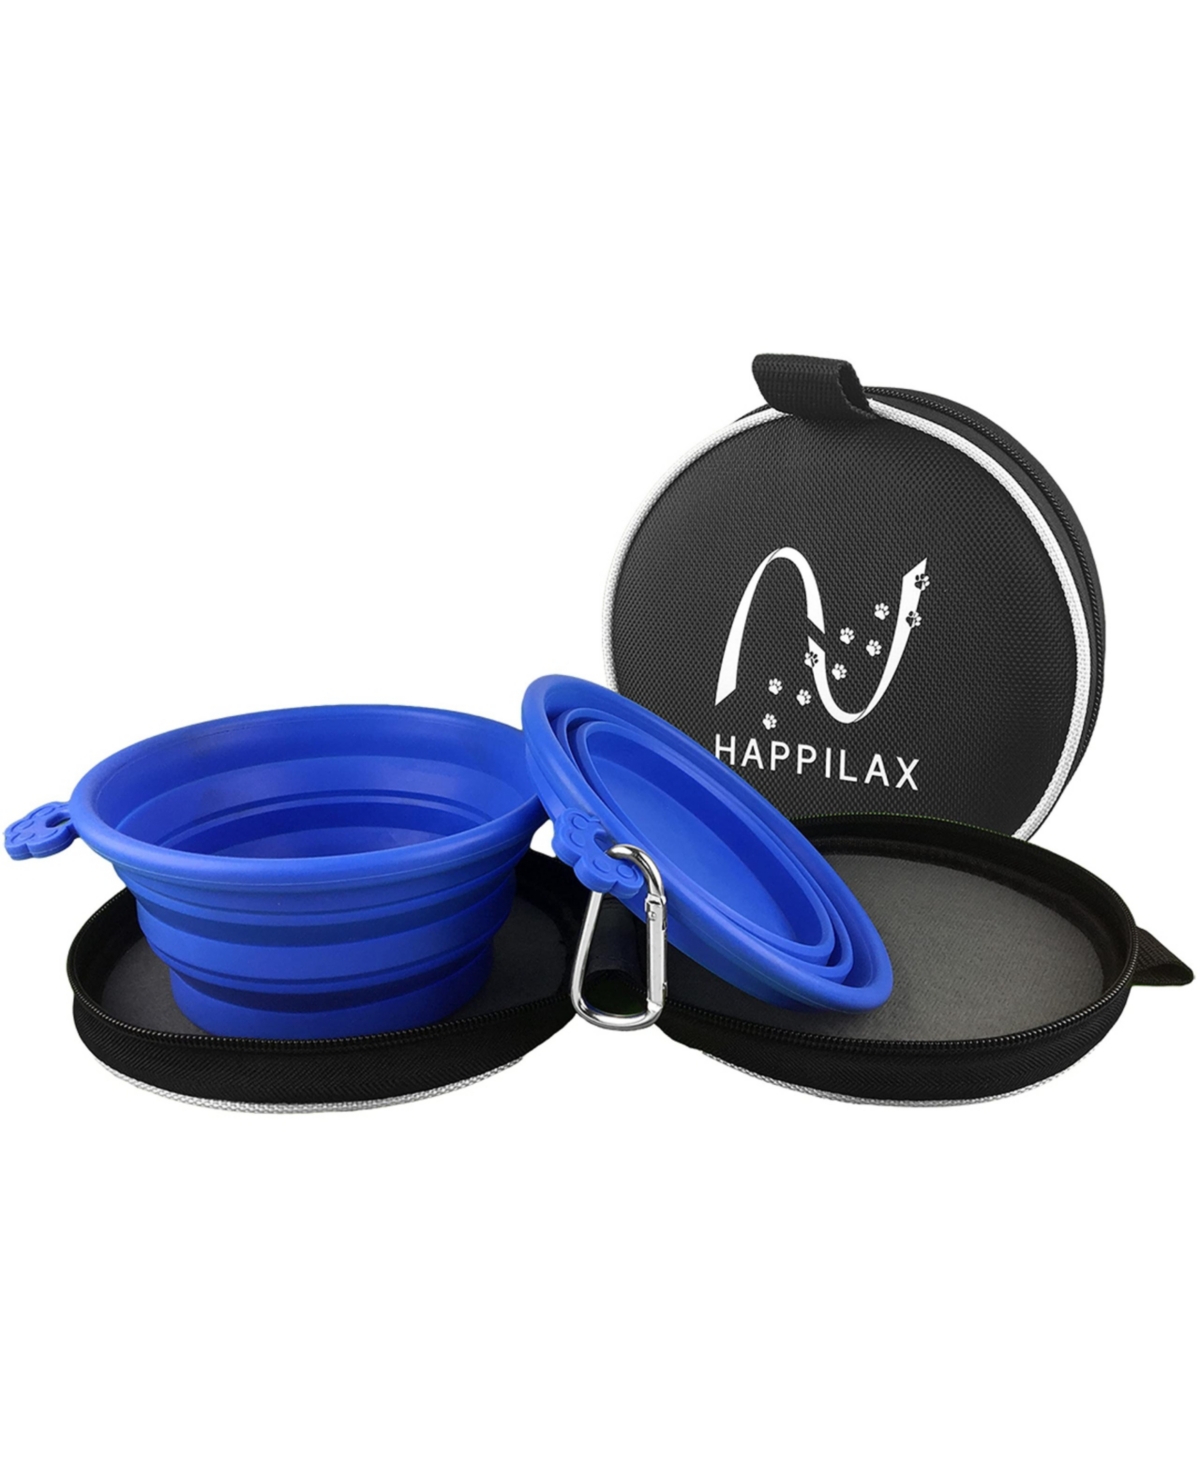 Portable Dog Bowl Set with Carabiners and Travel Bag - Blue